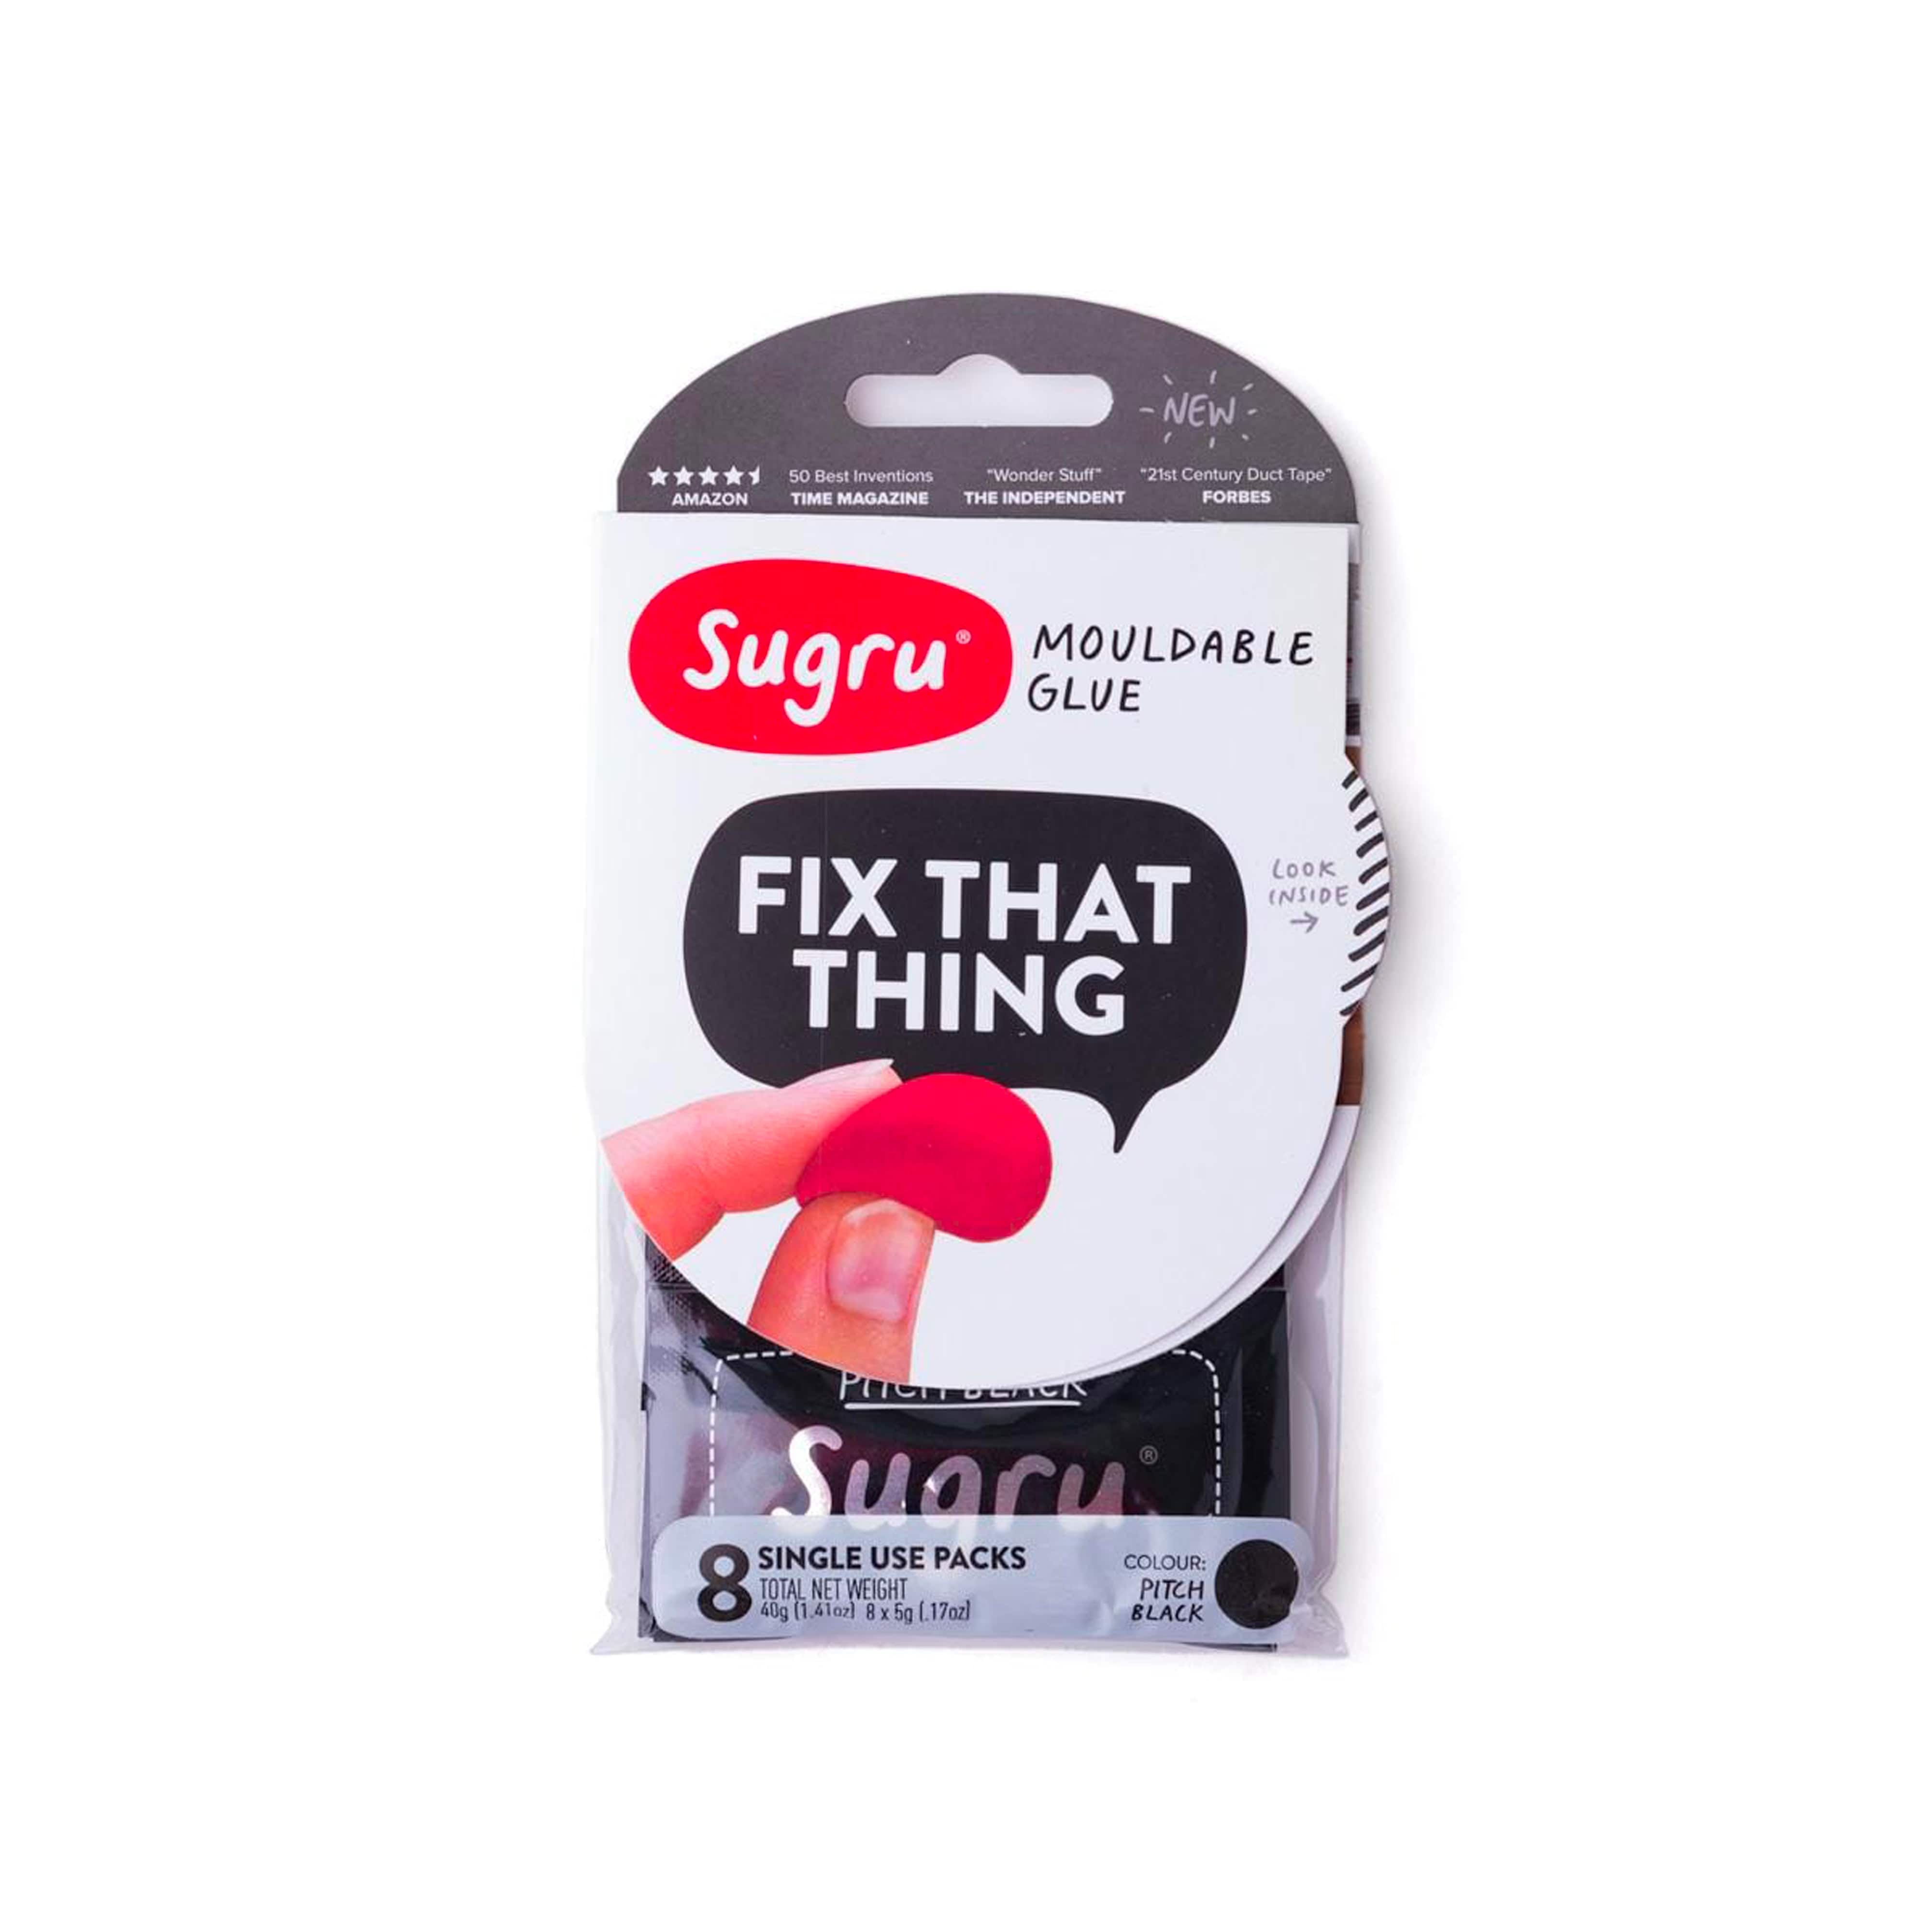 Sugru is a Revolutionary 'Adult Silly Putty' for DIYers - Brit + Co